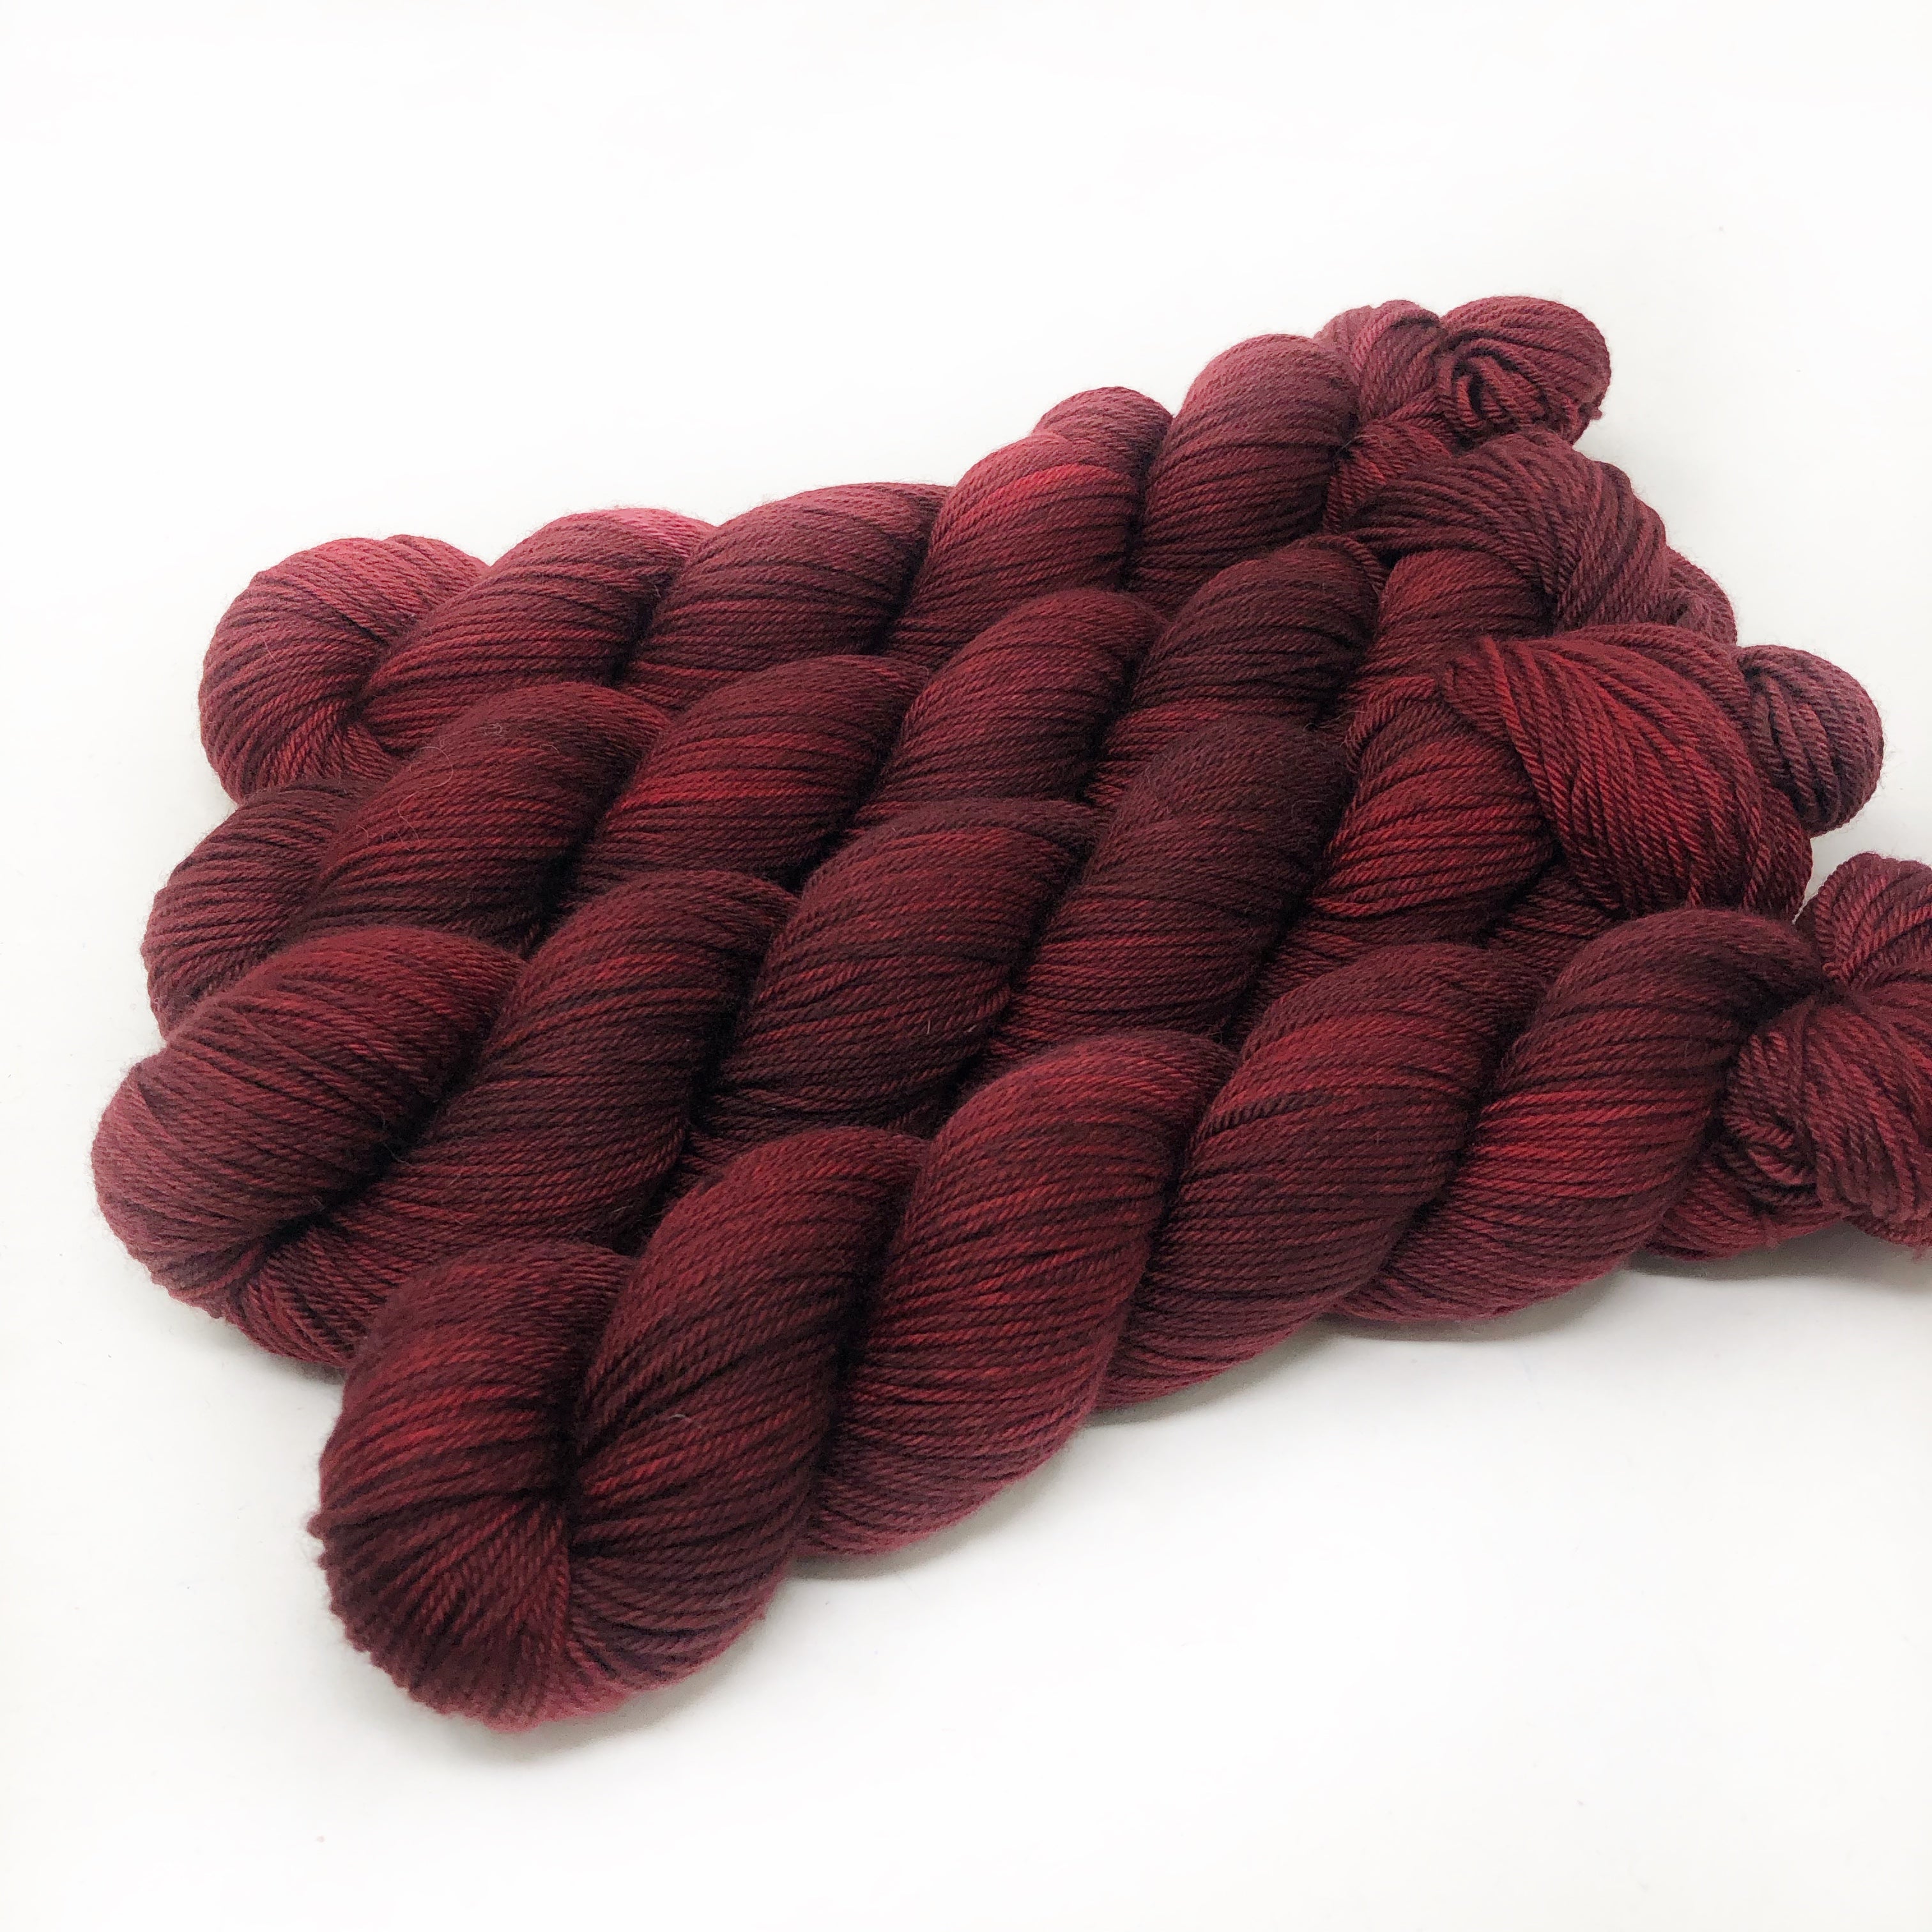 Rose Red - Delightful DK - the perfect sweater yarn